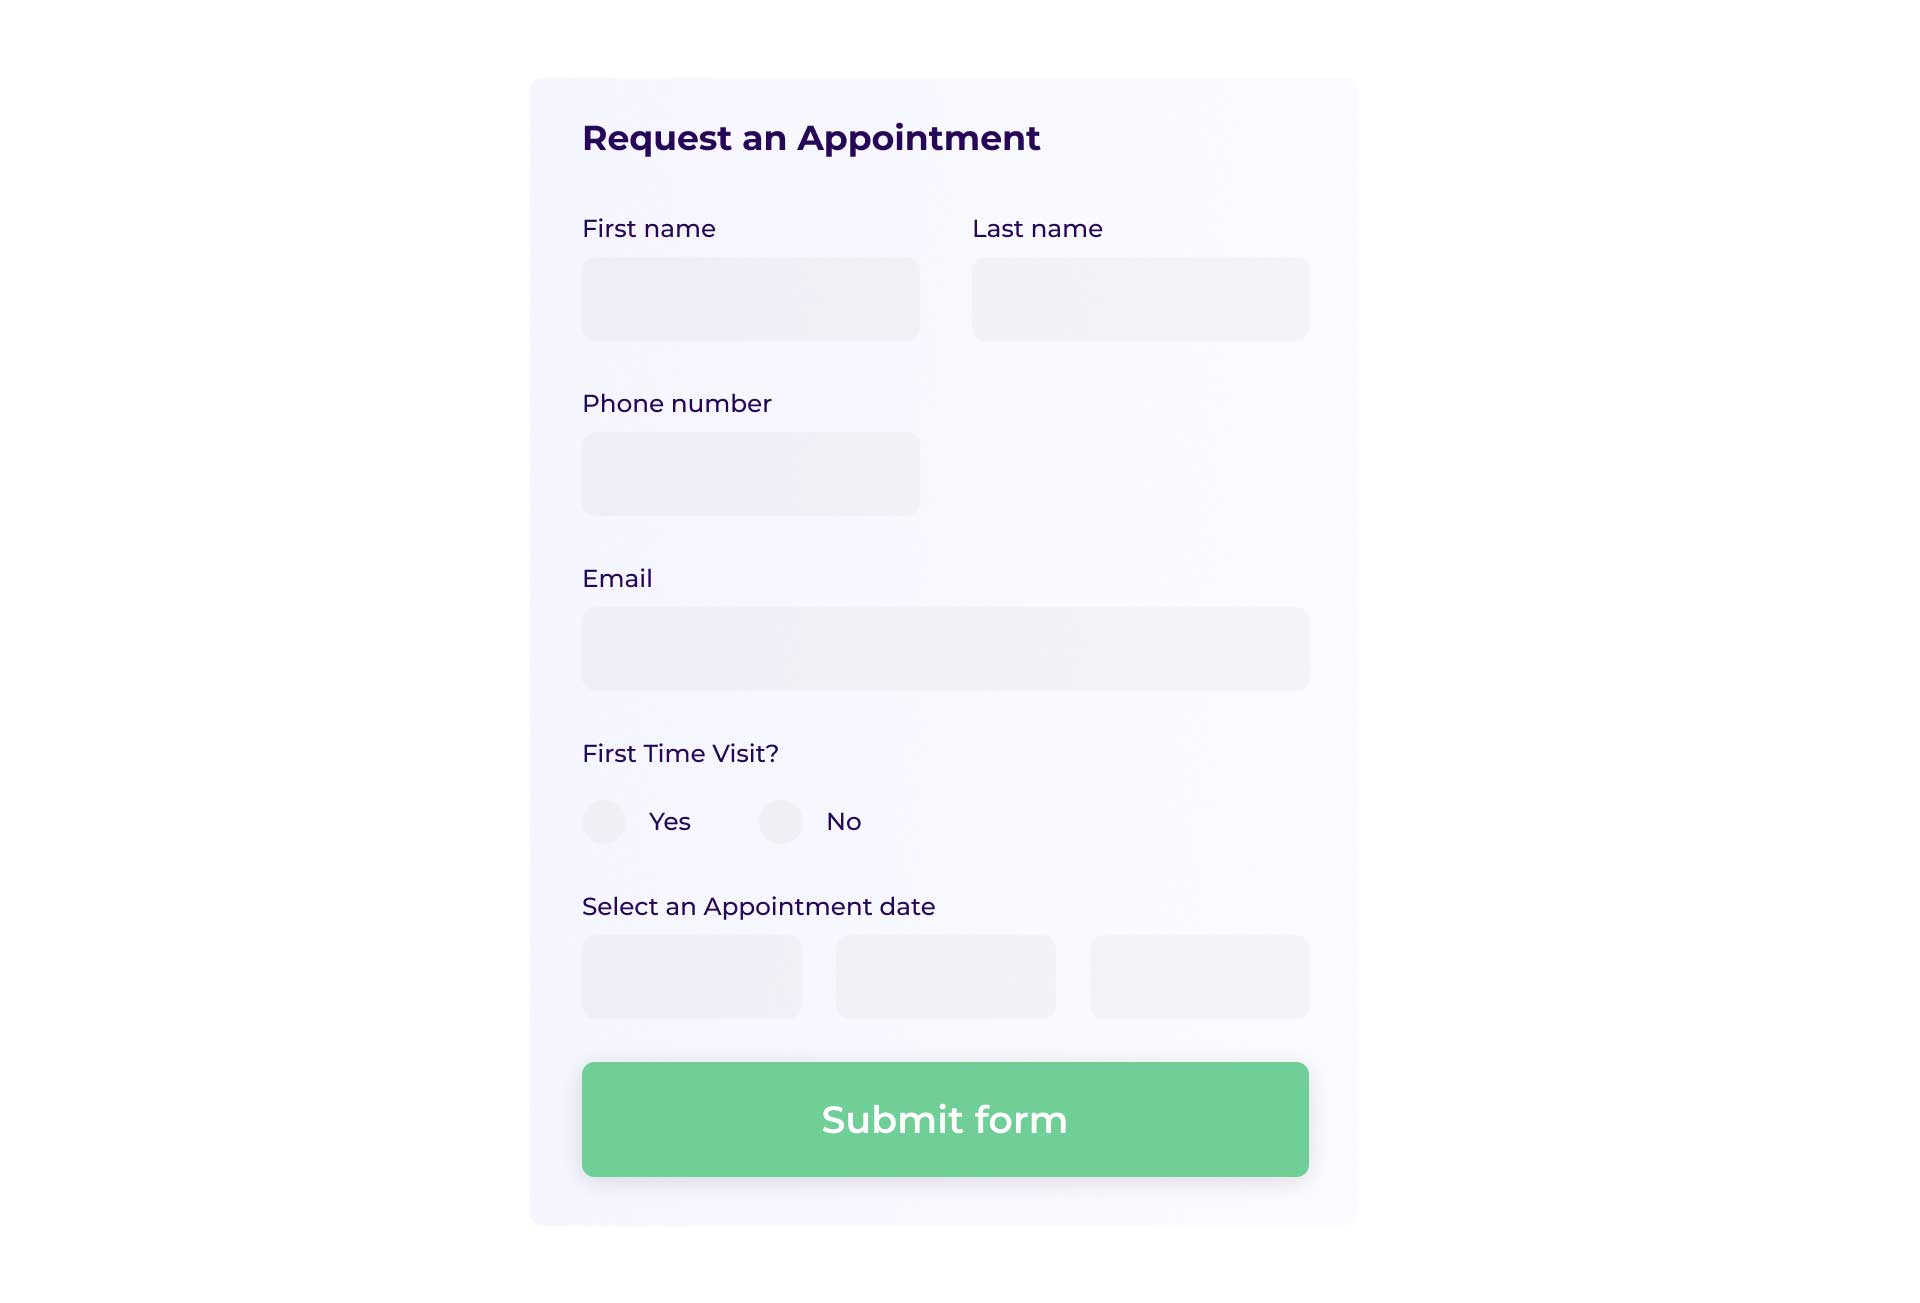 Request an Appointment-Form-Mockup